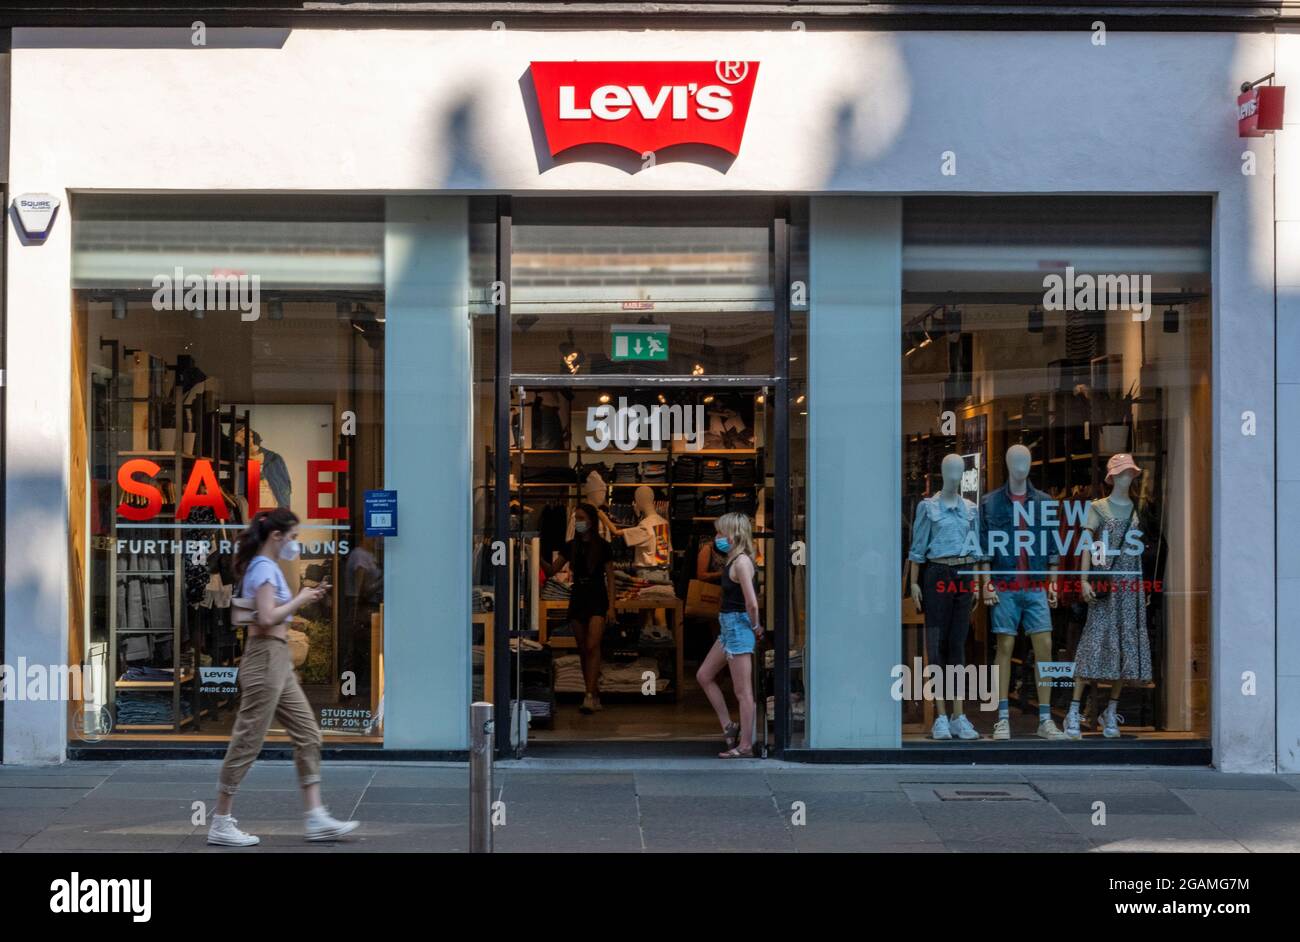 Levis Shop High Resolution Stock Photography and Images - Alamy